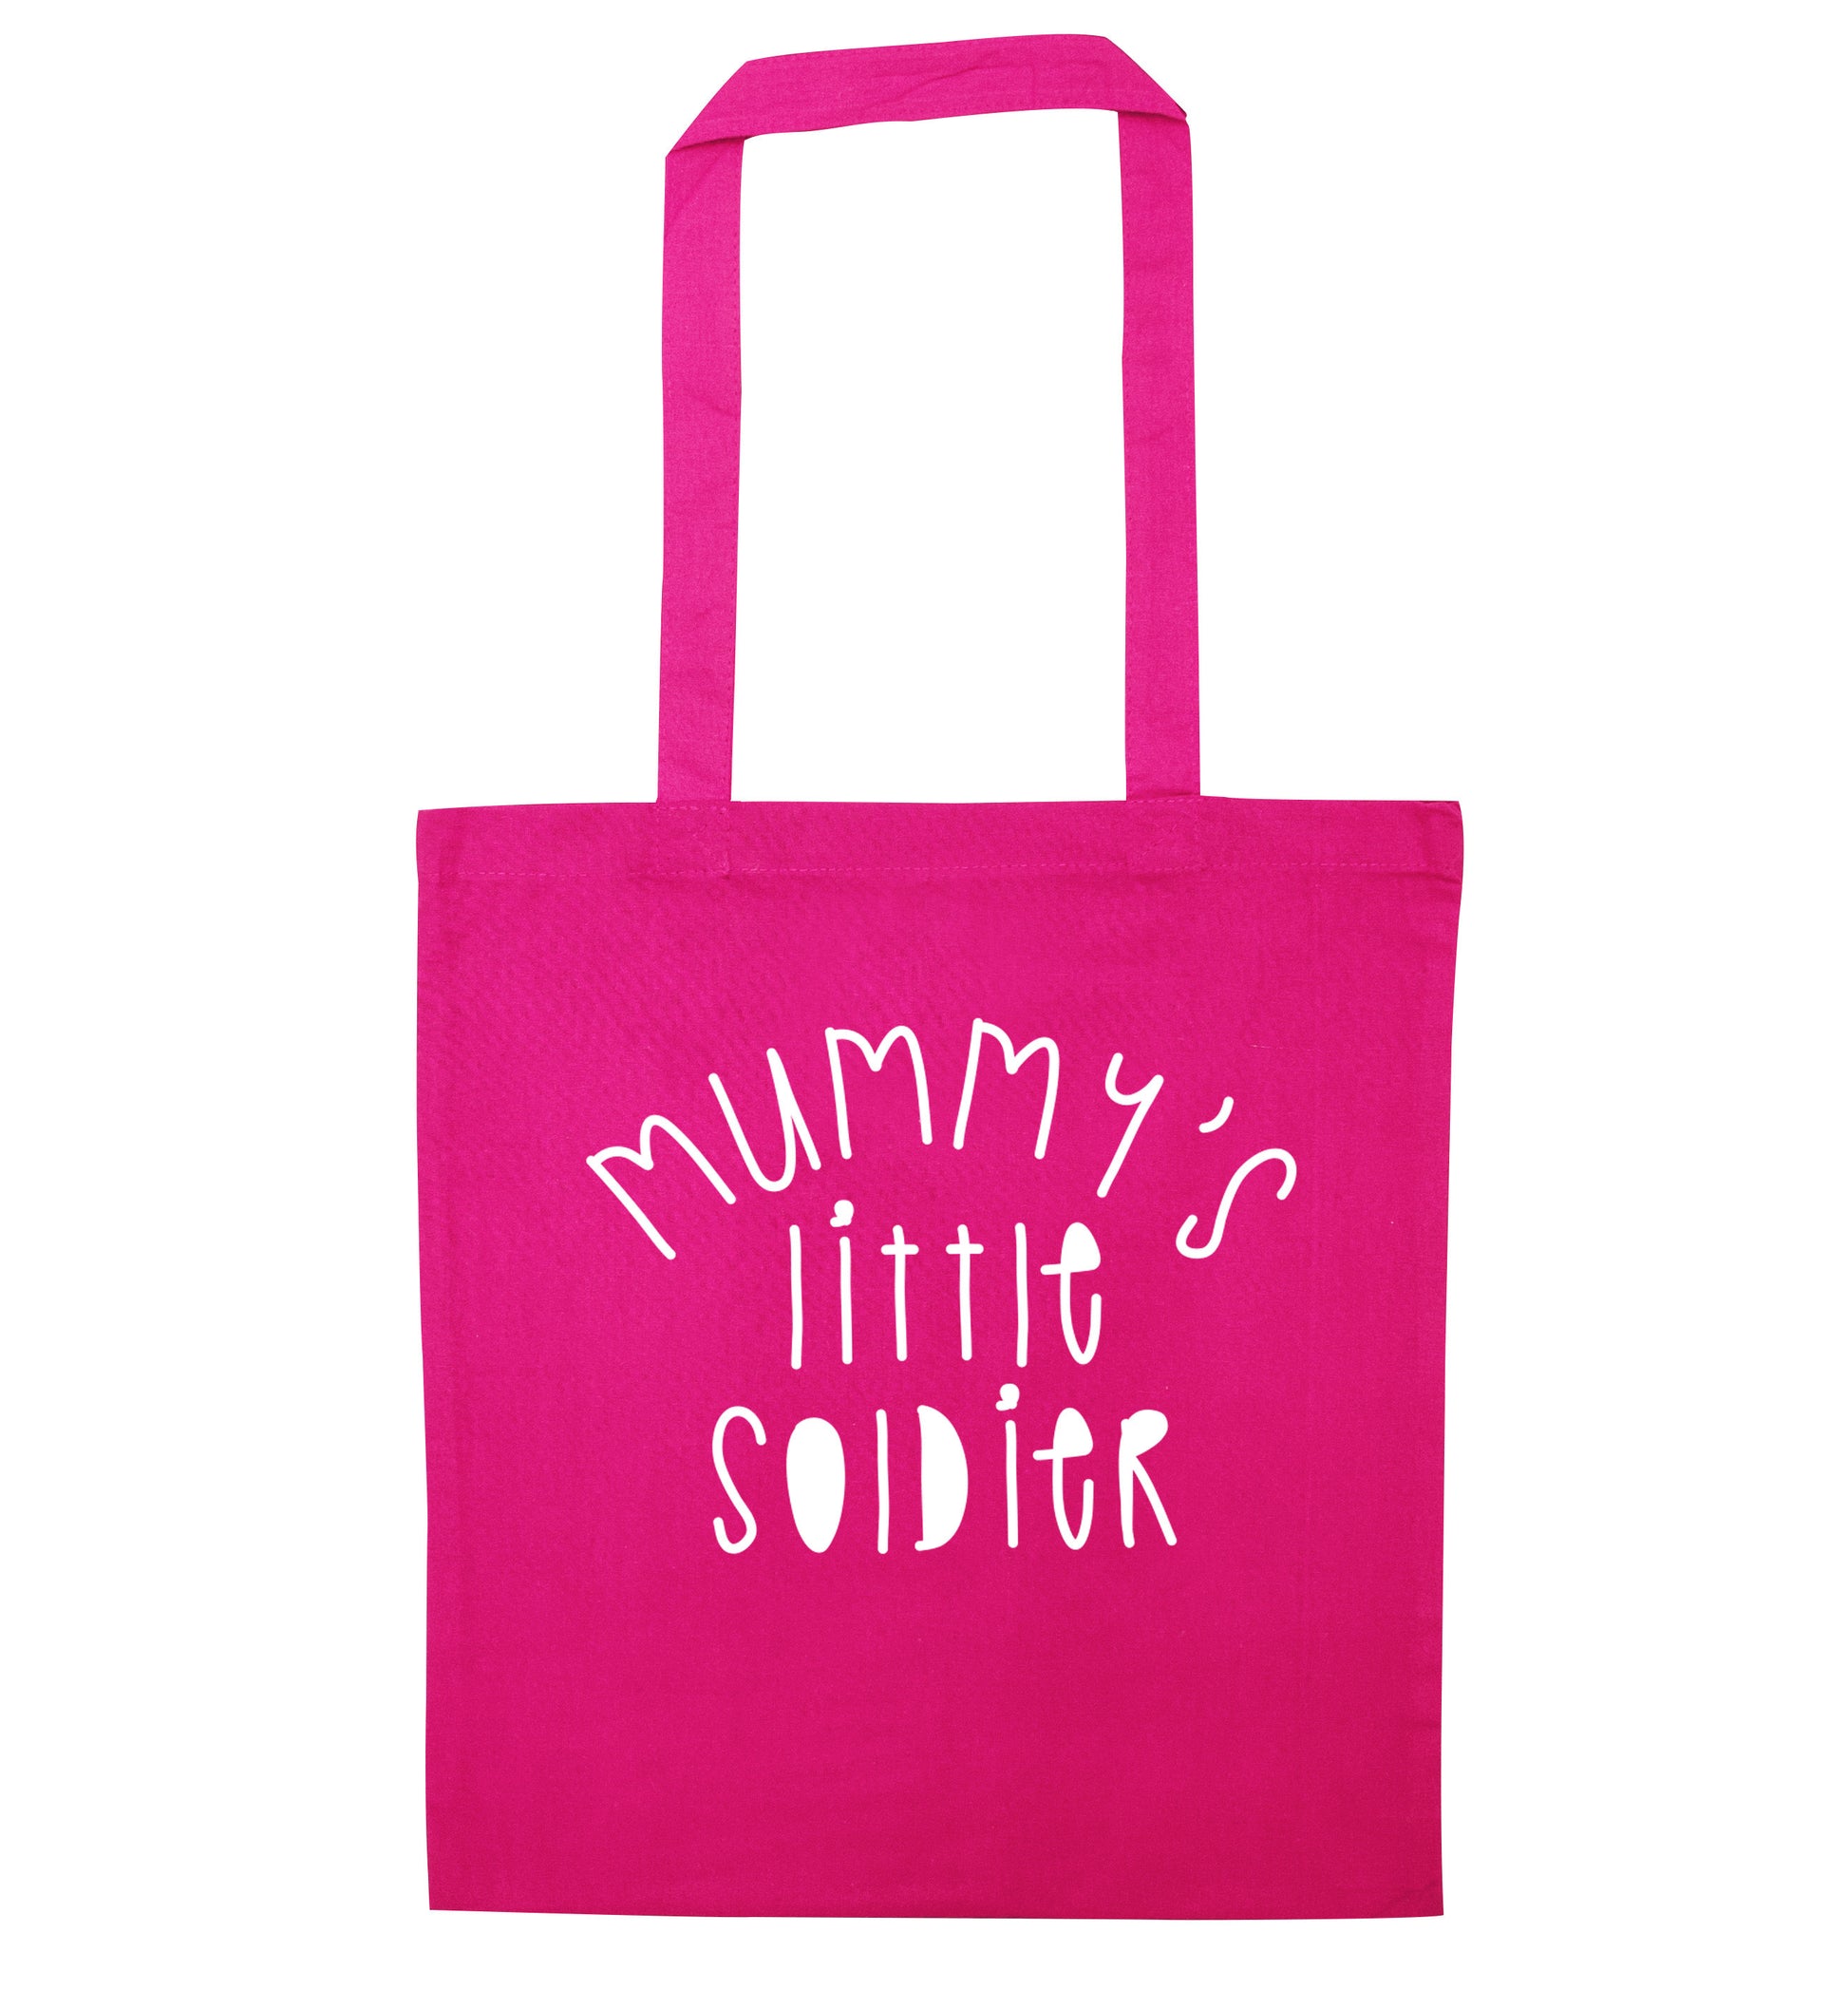 Mummy's little soldier pink tote bag